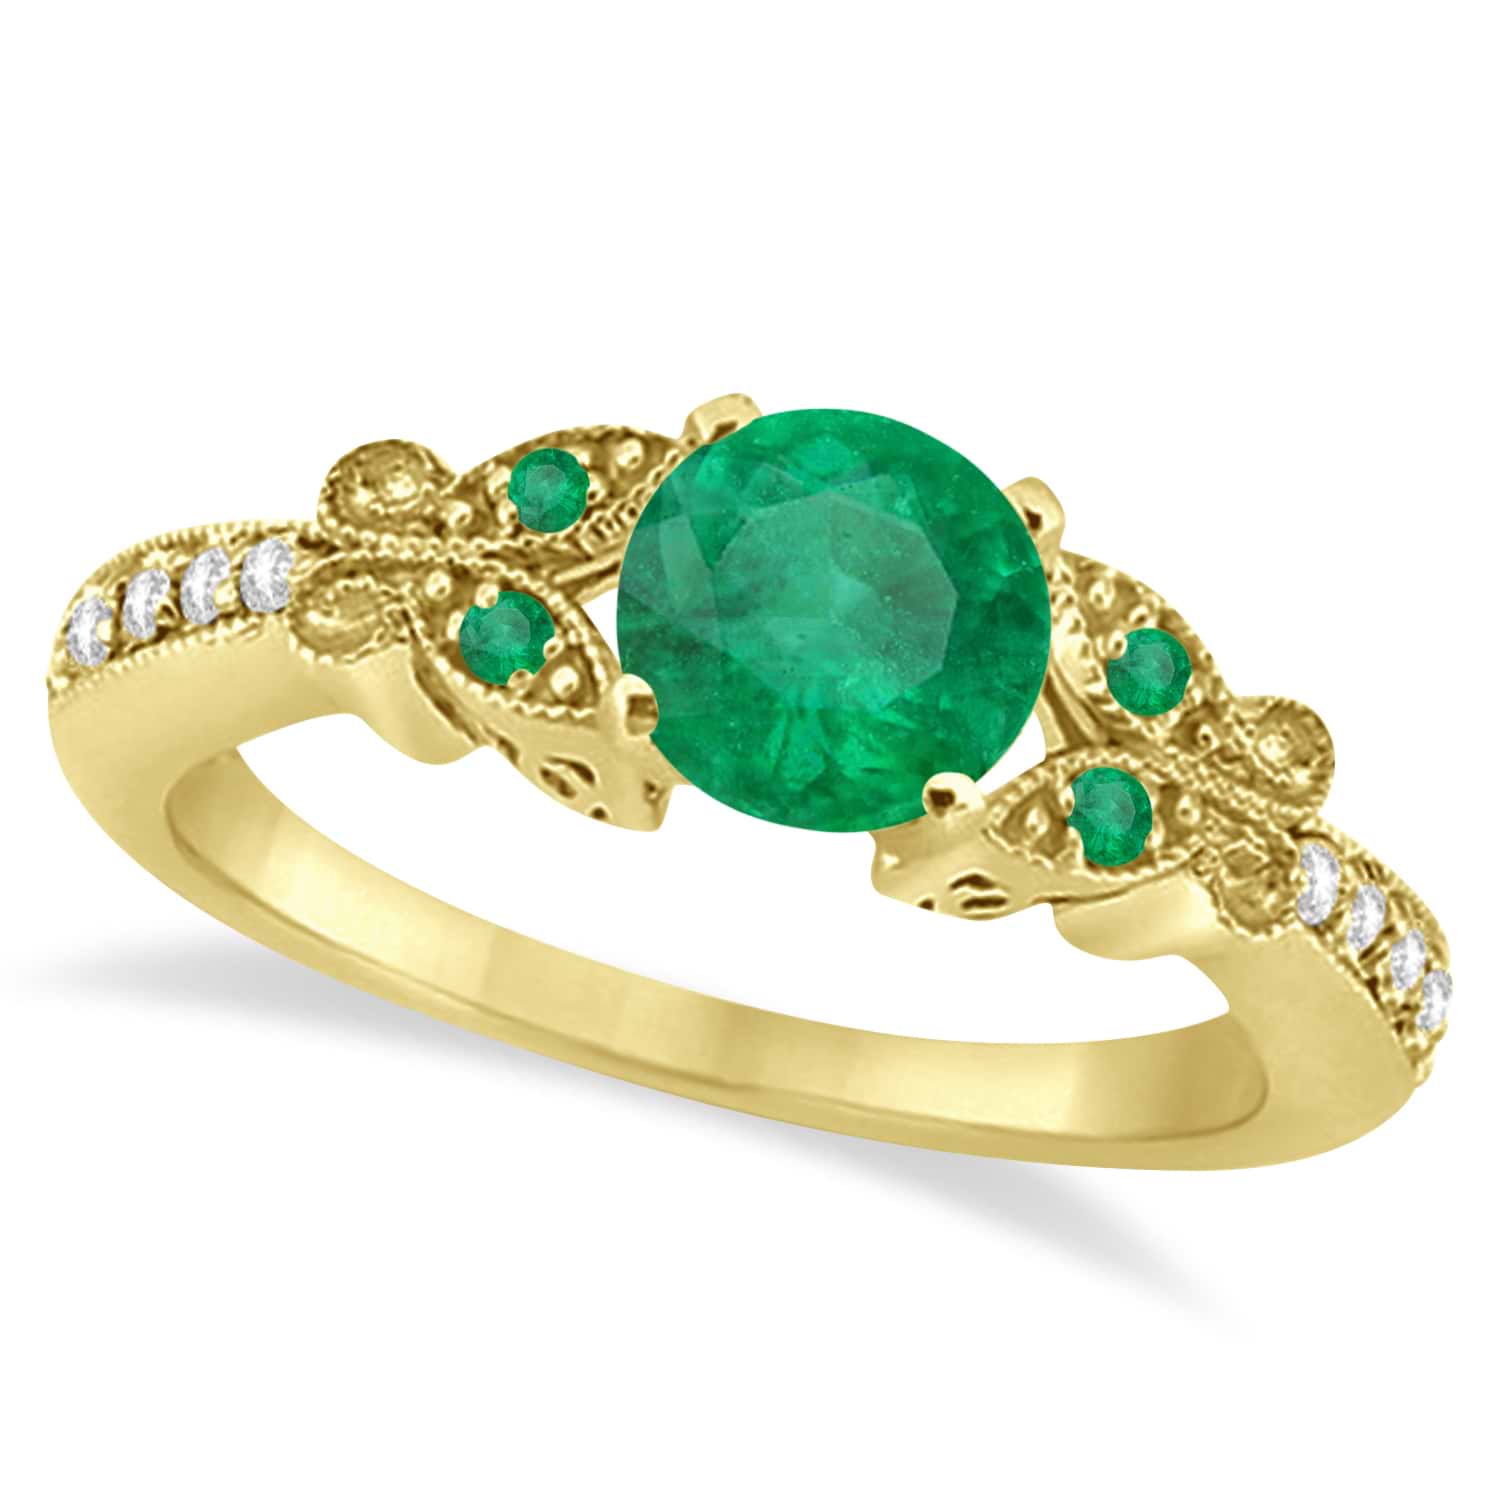 Butterfly Genuine Emerald & Diamond Engagement Ring 18K Yellow Gold 0.71ct